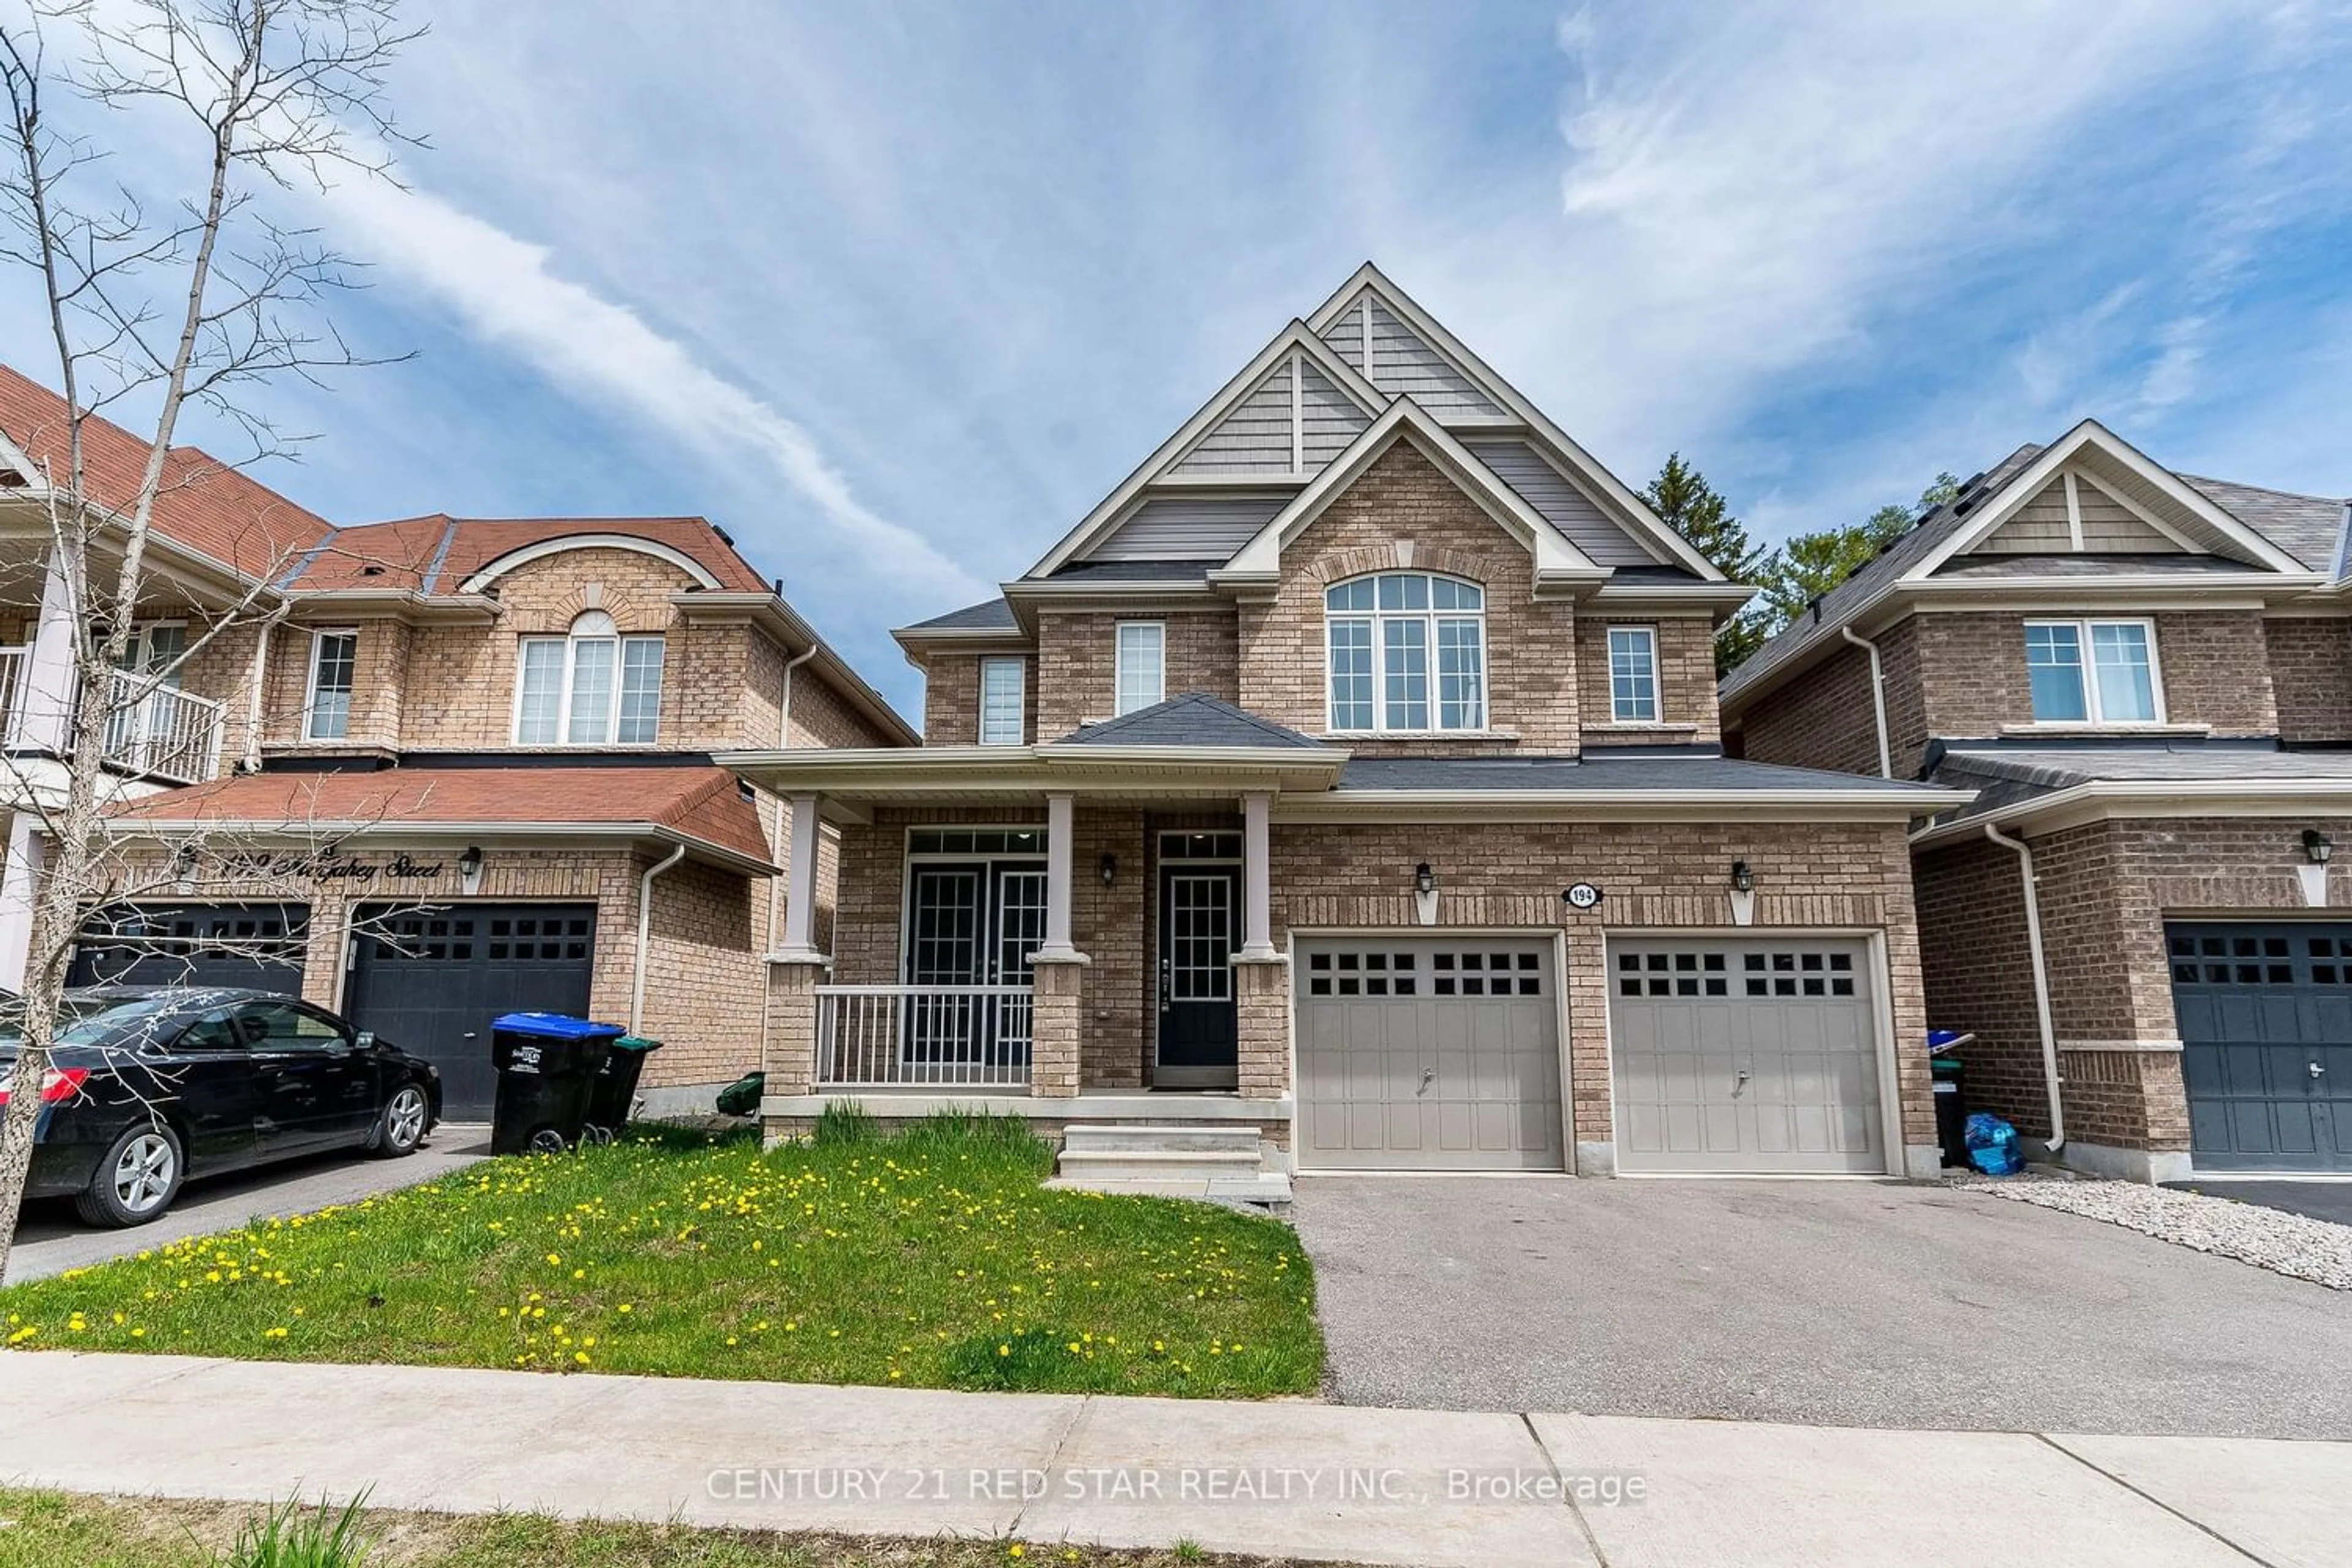 Home with brick exterior material for 194 Mcgahey St, New Tecumseth Ontario L0G 1W0